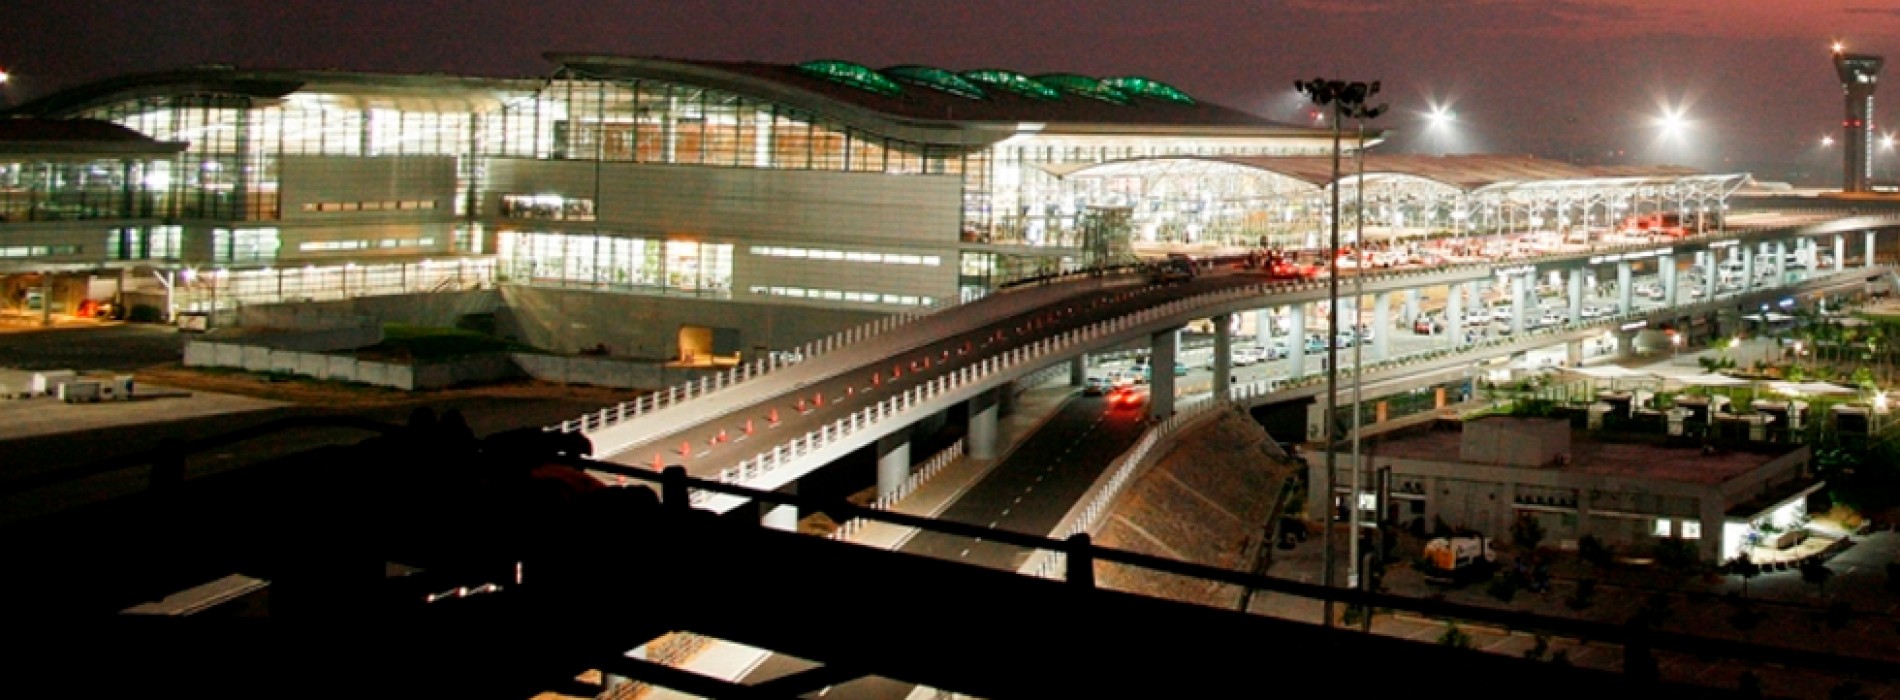 GMR’s Hyderabad airport introduces new facility